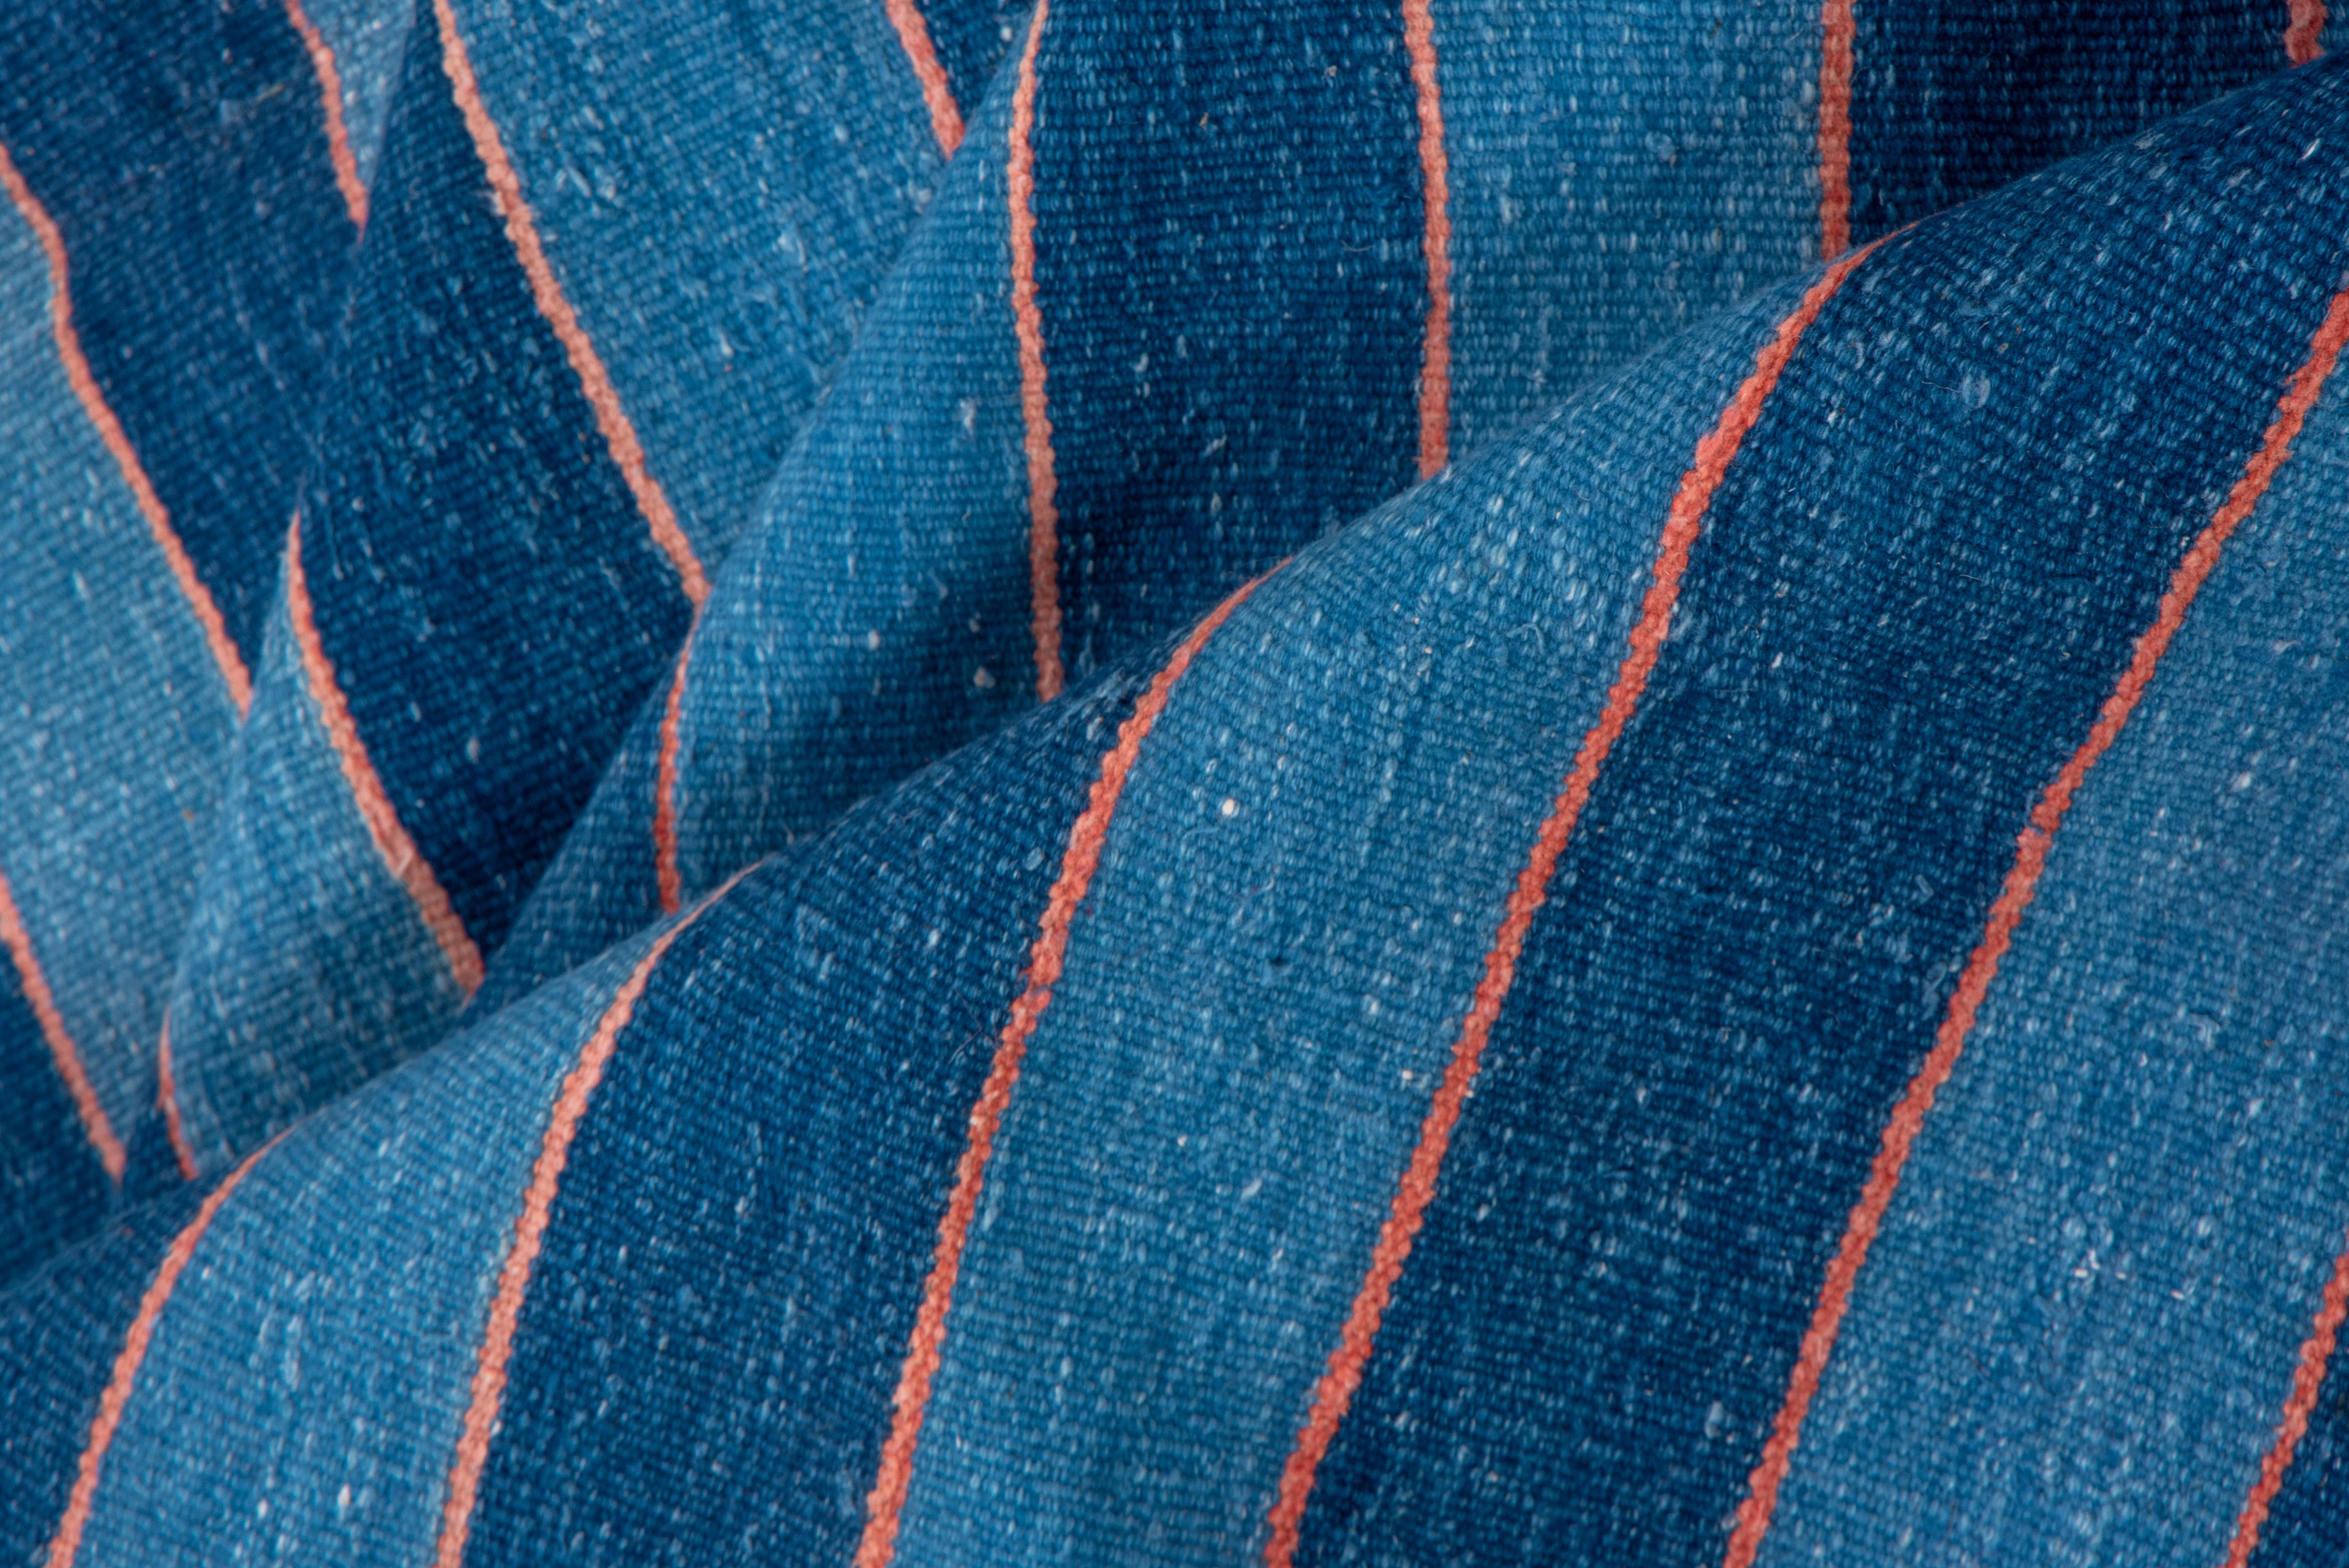 Rarely are dhurries signed by the head of the workshop. Narrow straw lines divide the lighter and darker blue stripes with their delicate internal variations, no two stripes alike. All cotton construction.